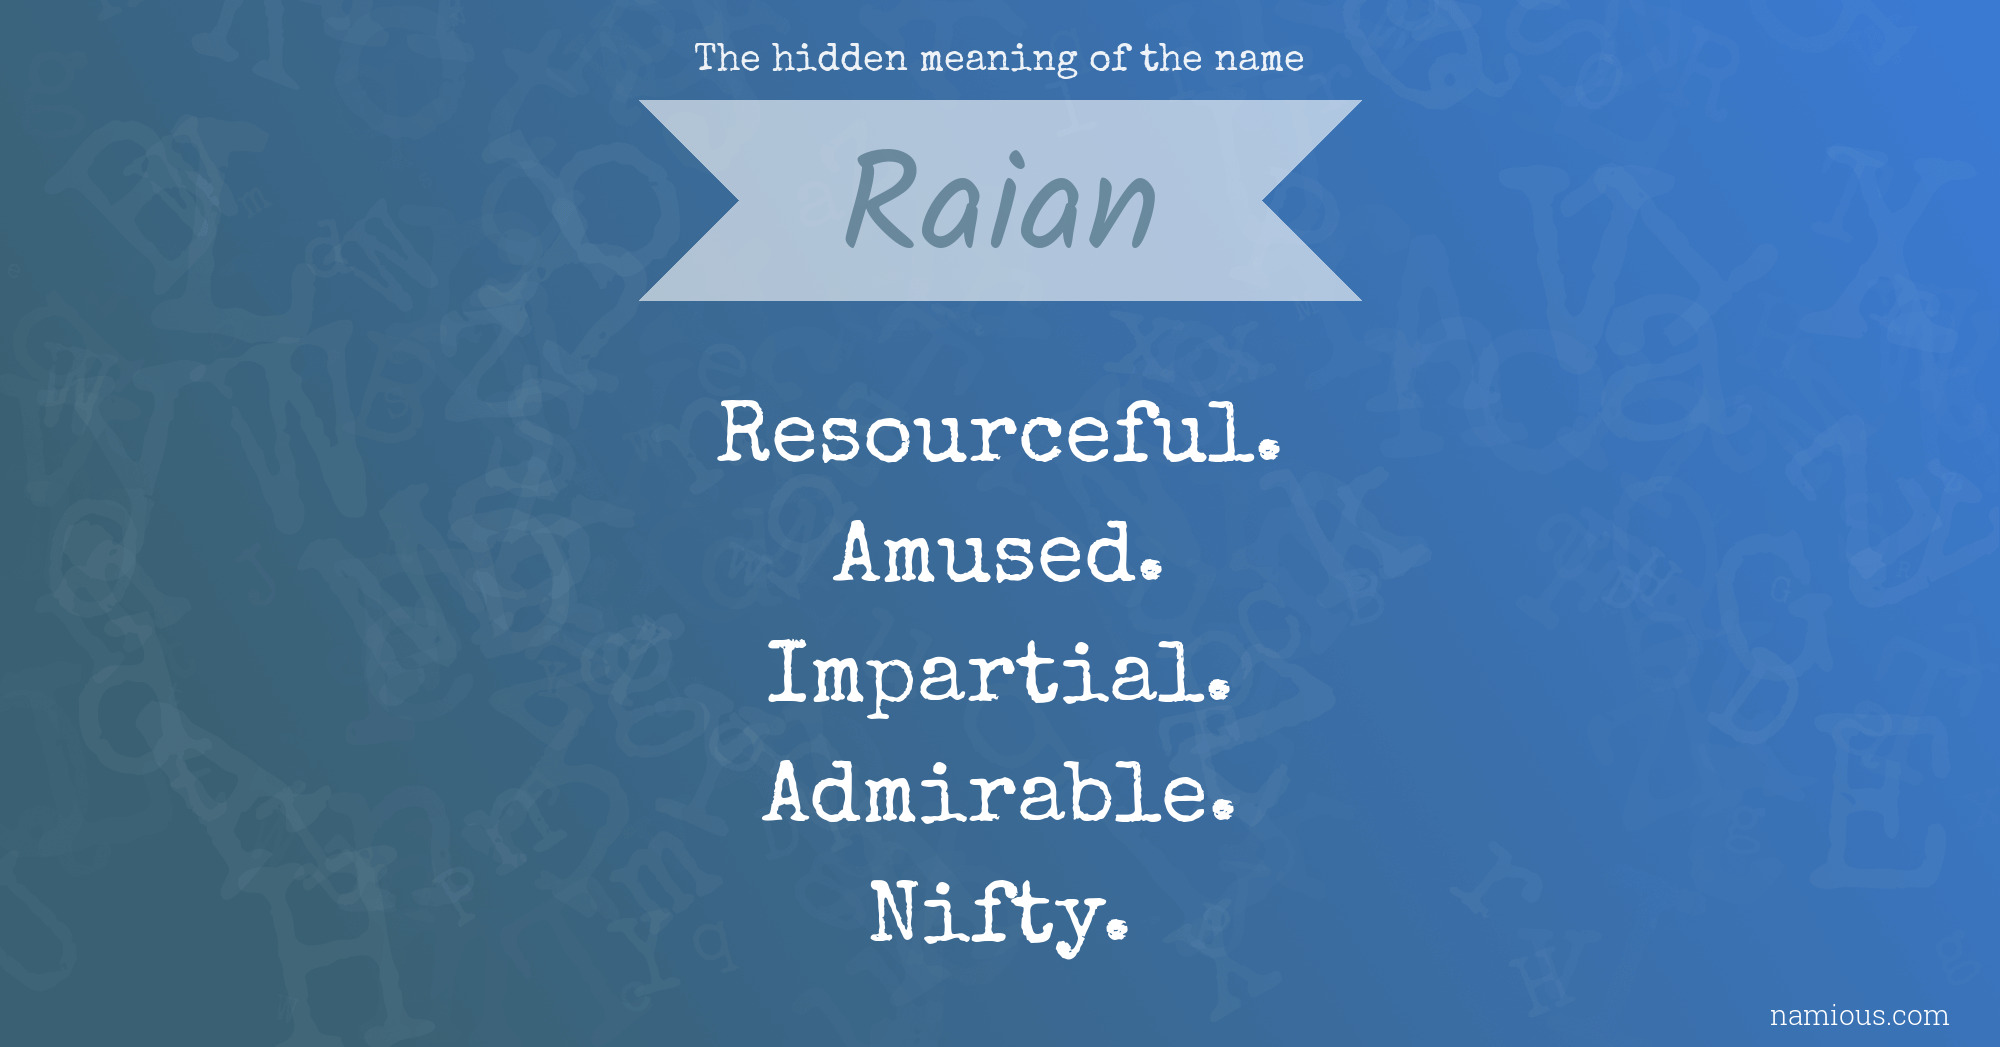 The hidden meaning of the name Raian